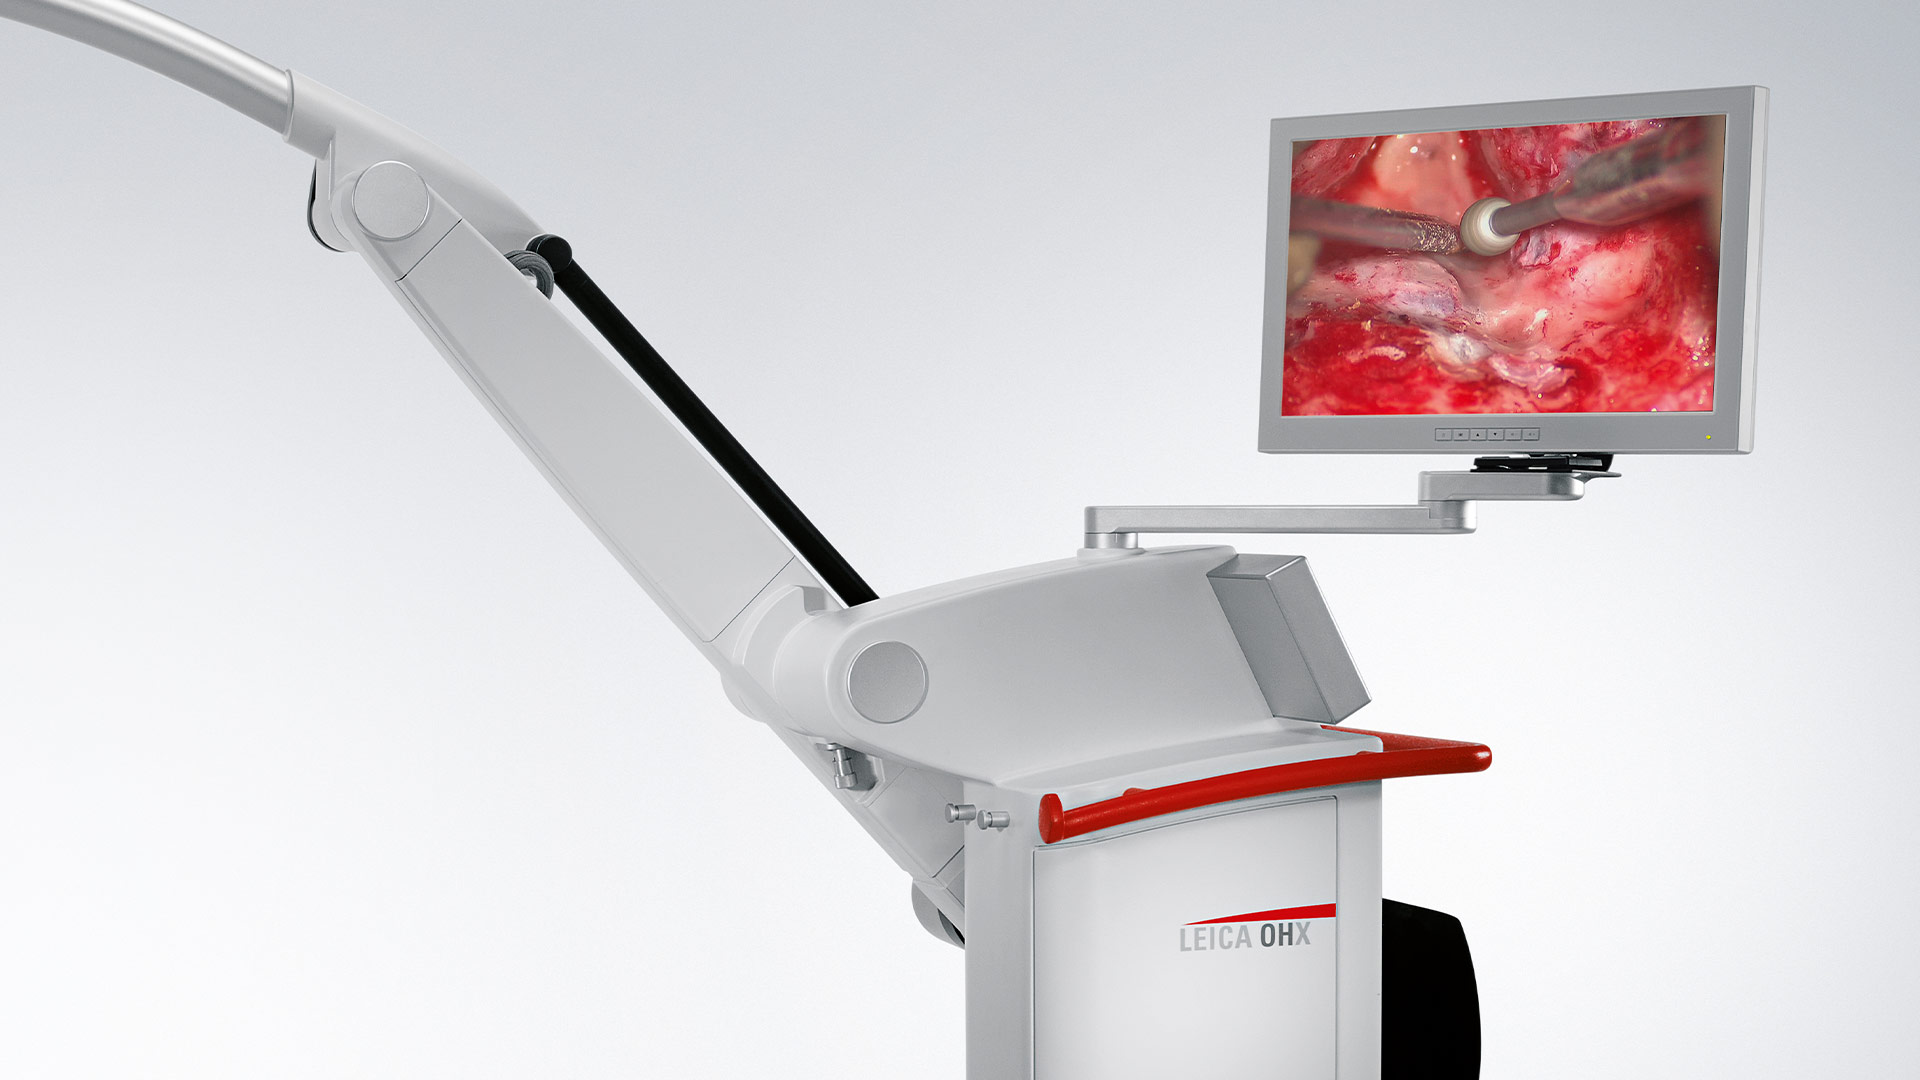 https://www.leica-microsystems.com/fileadmin/content_excellence/product_overview/surgical-microscopes/fullwidth-aoa-slider/lms-surcigal-microscopes-aoa-fullwidth-slider_ENT.jpg